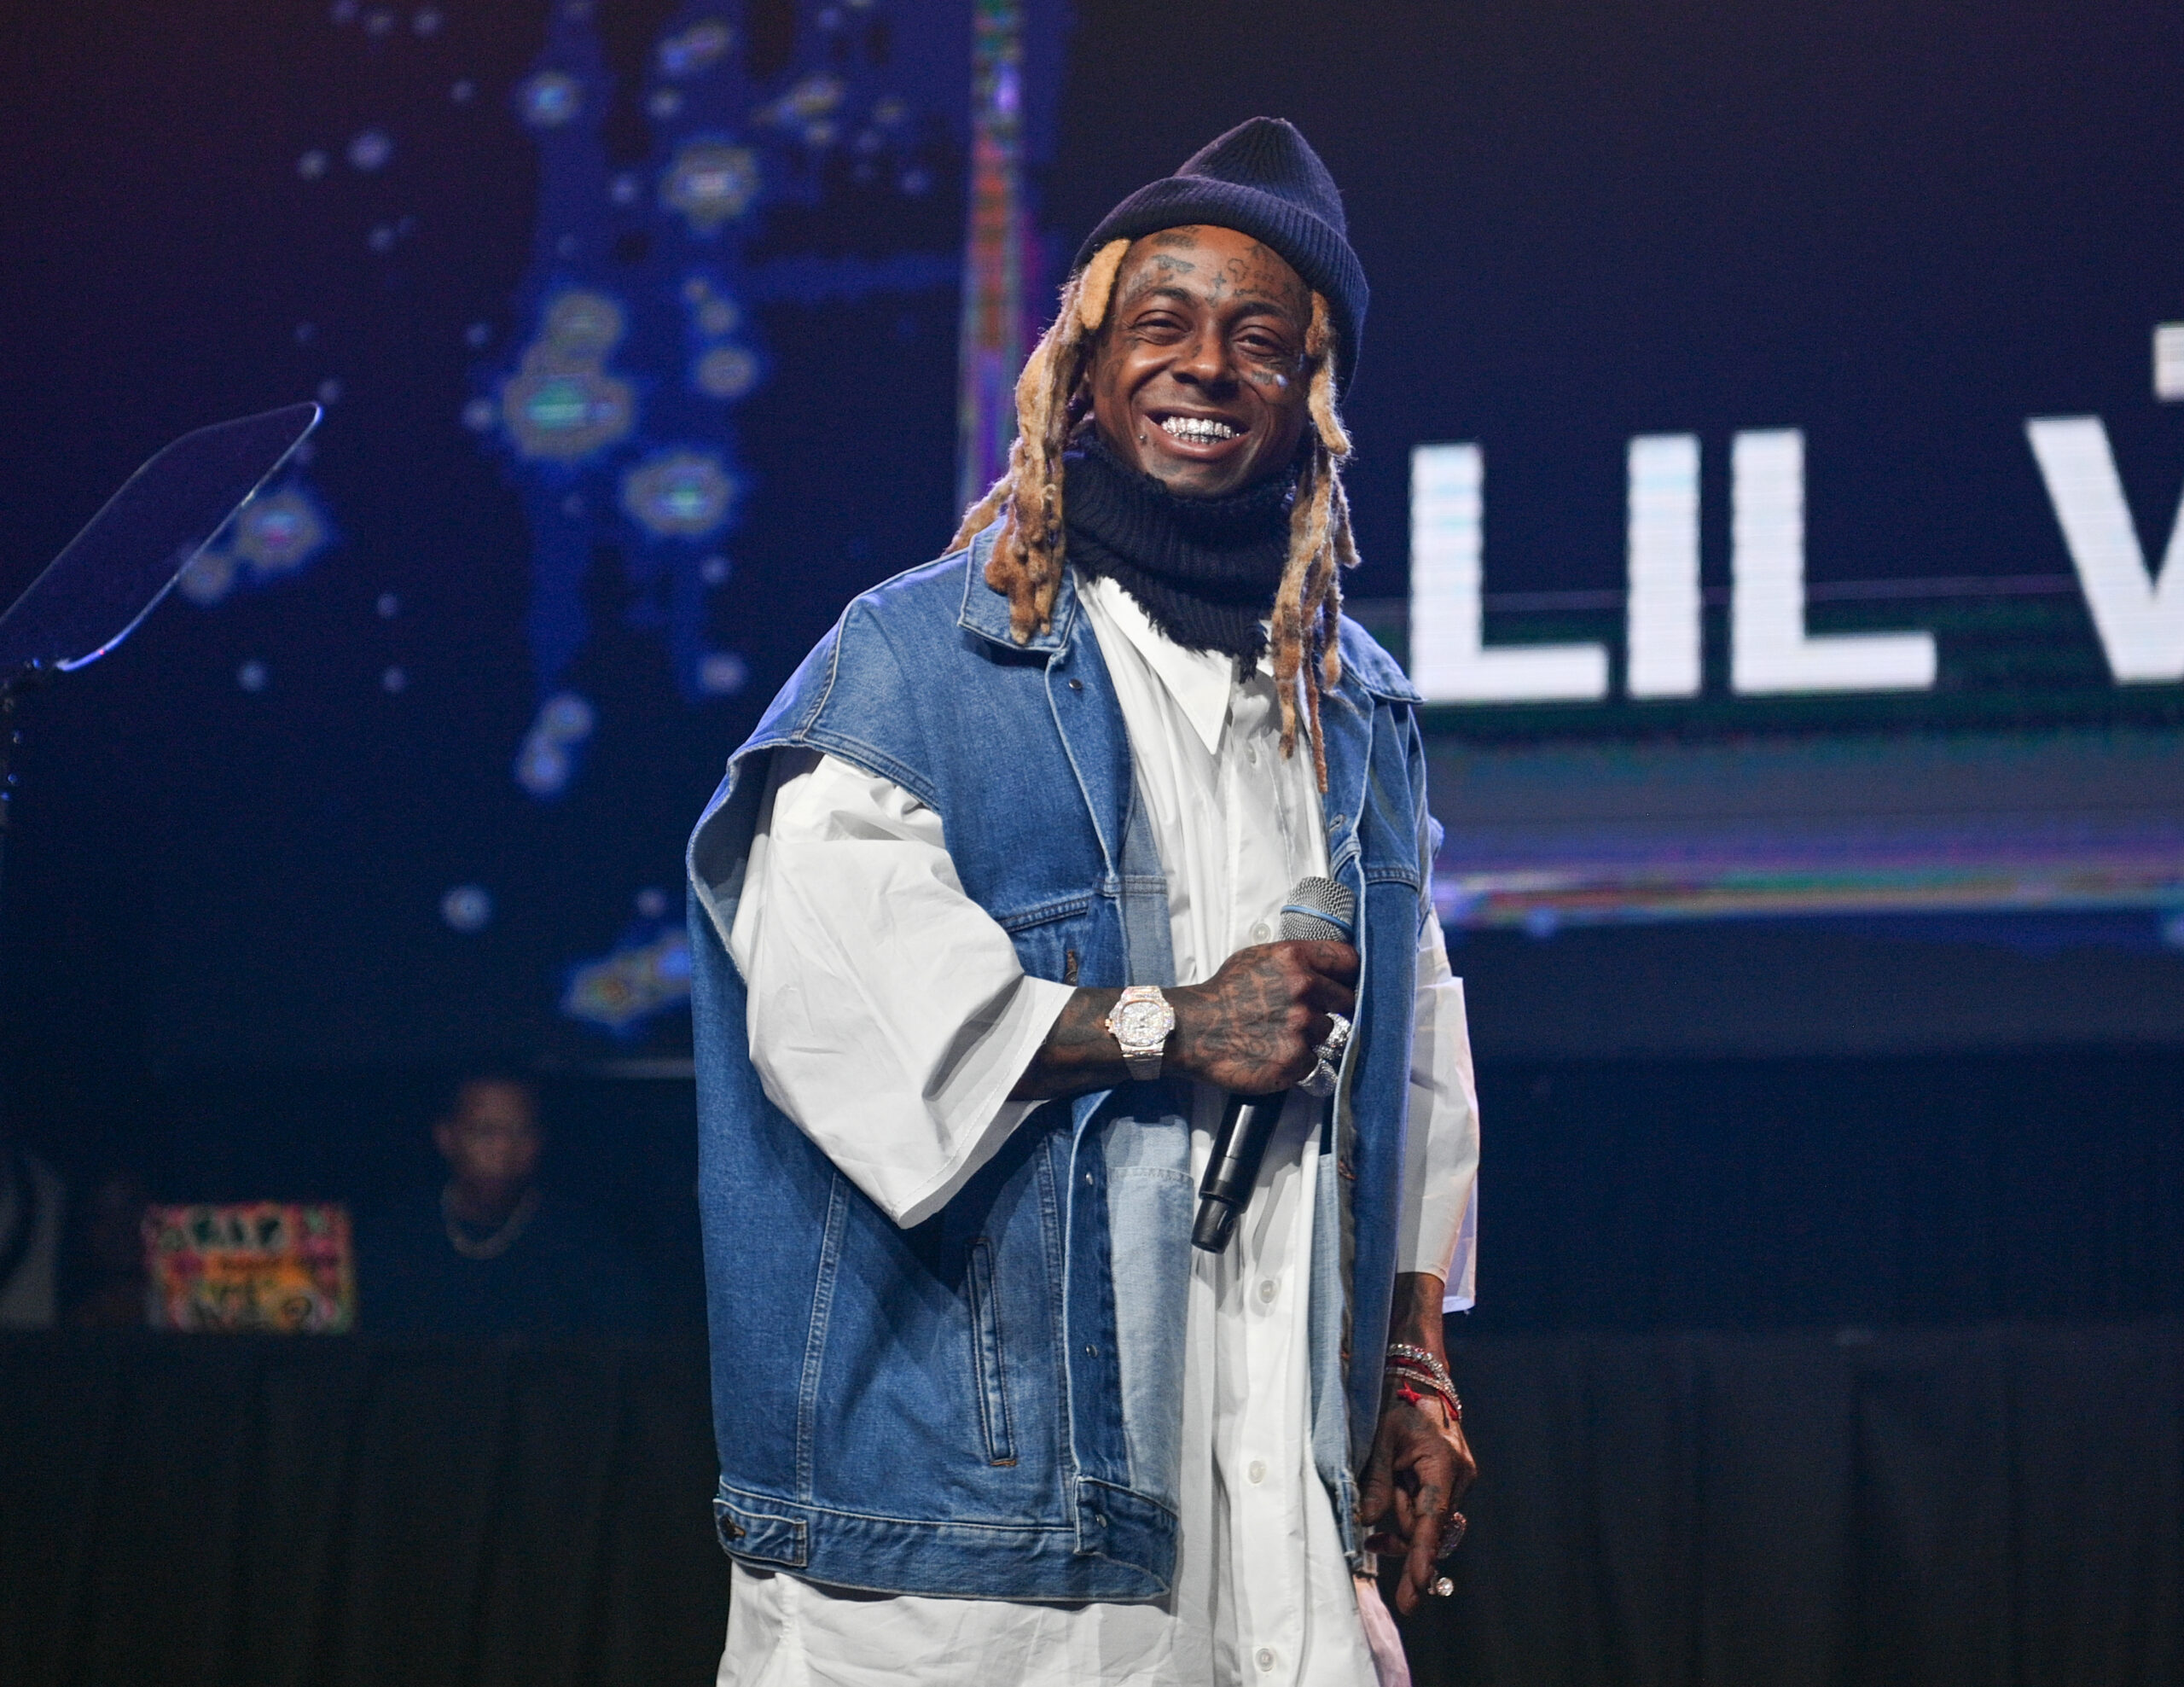 Lil Wayne Speaks On VMAs Performance For Hip-Hop’s 50th, Says He Was “Nervous”